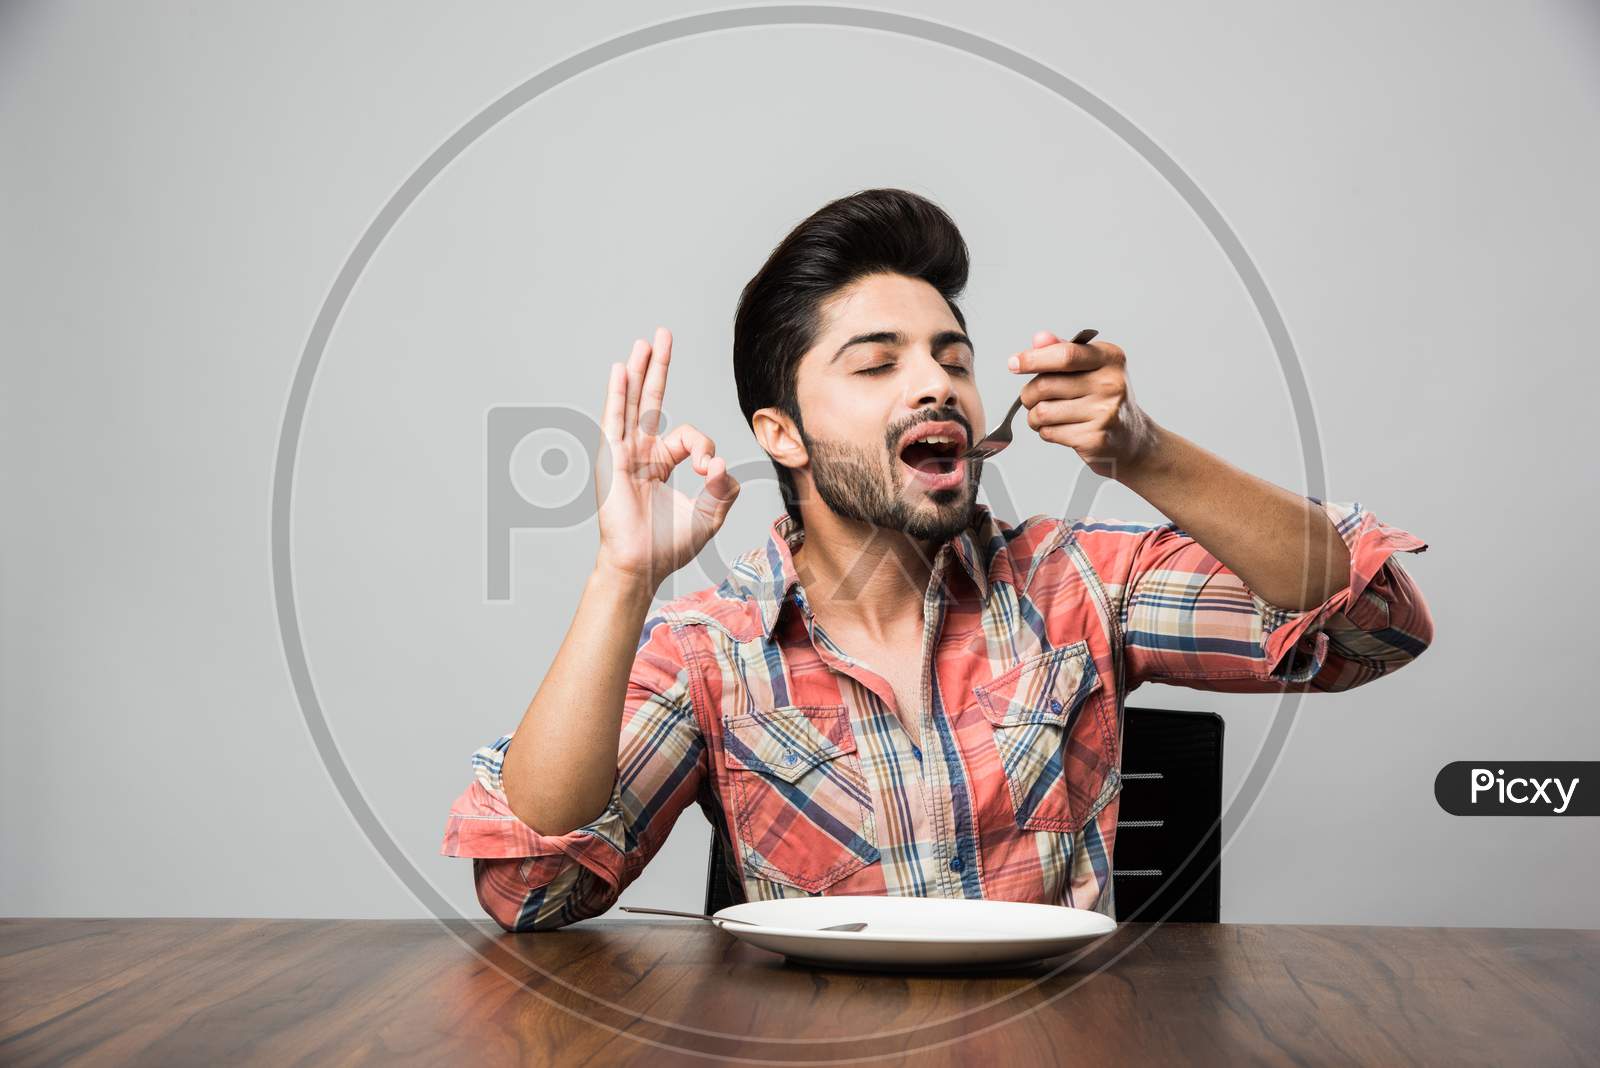 empty plate and Indian man with beard holding spoon and fork, wearing checkered shirt and sitting at table